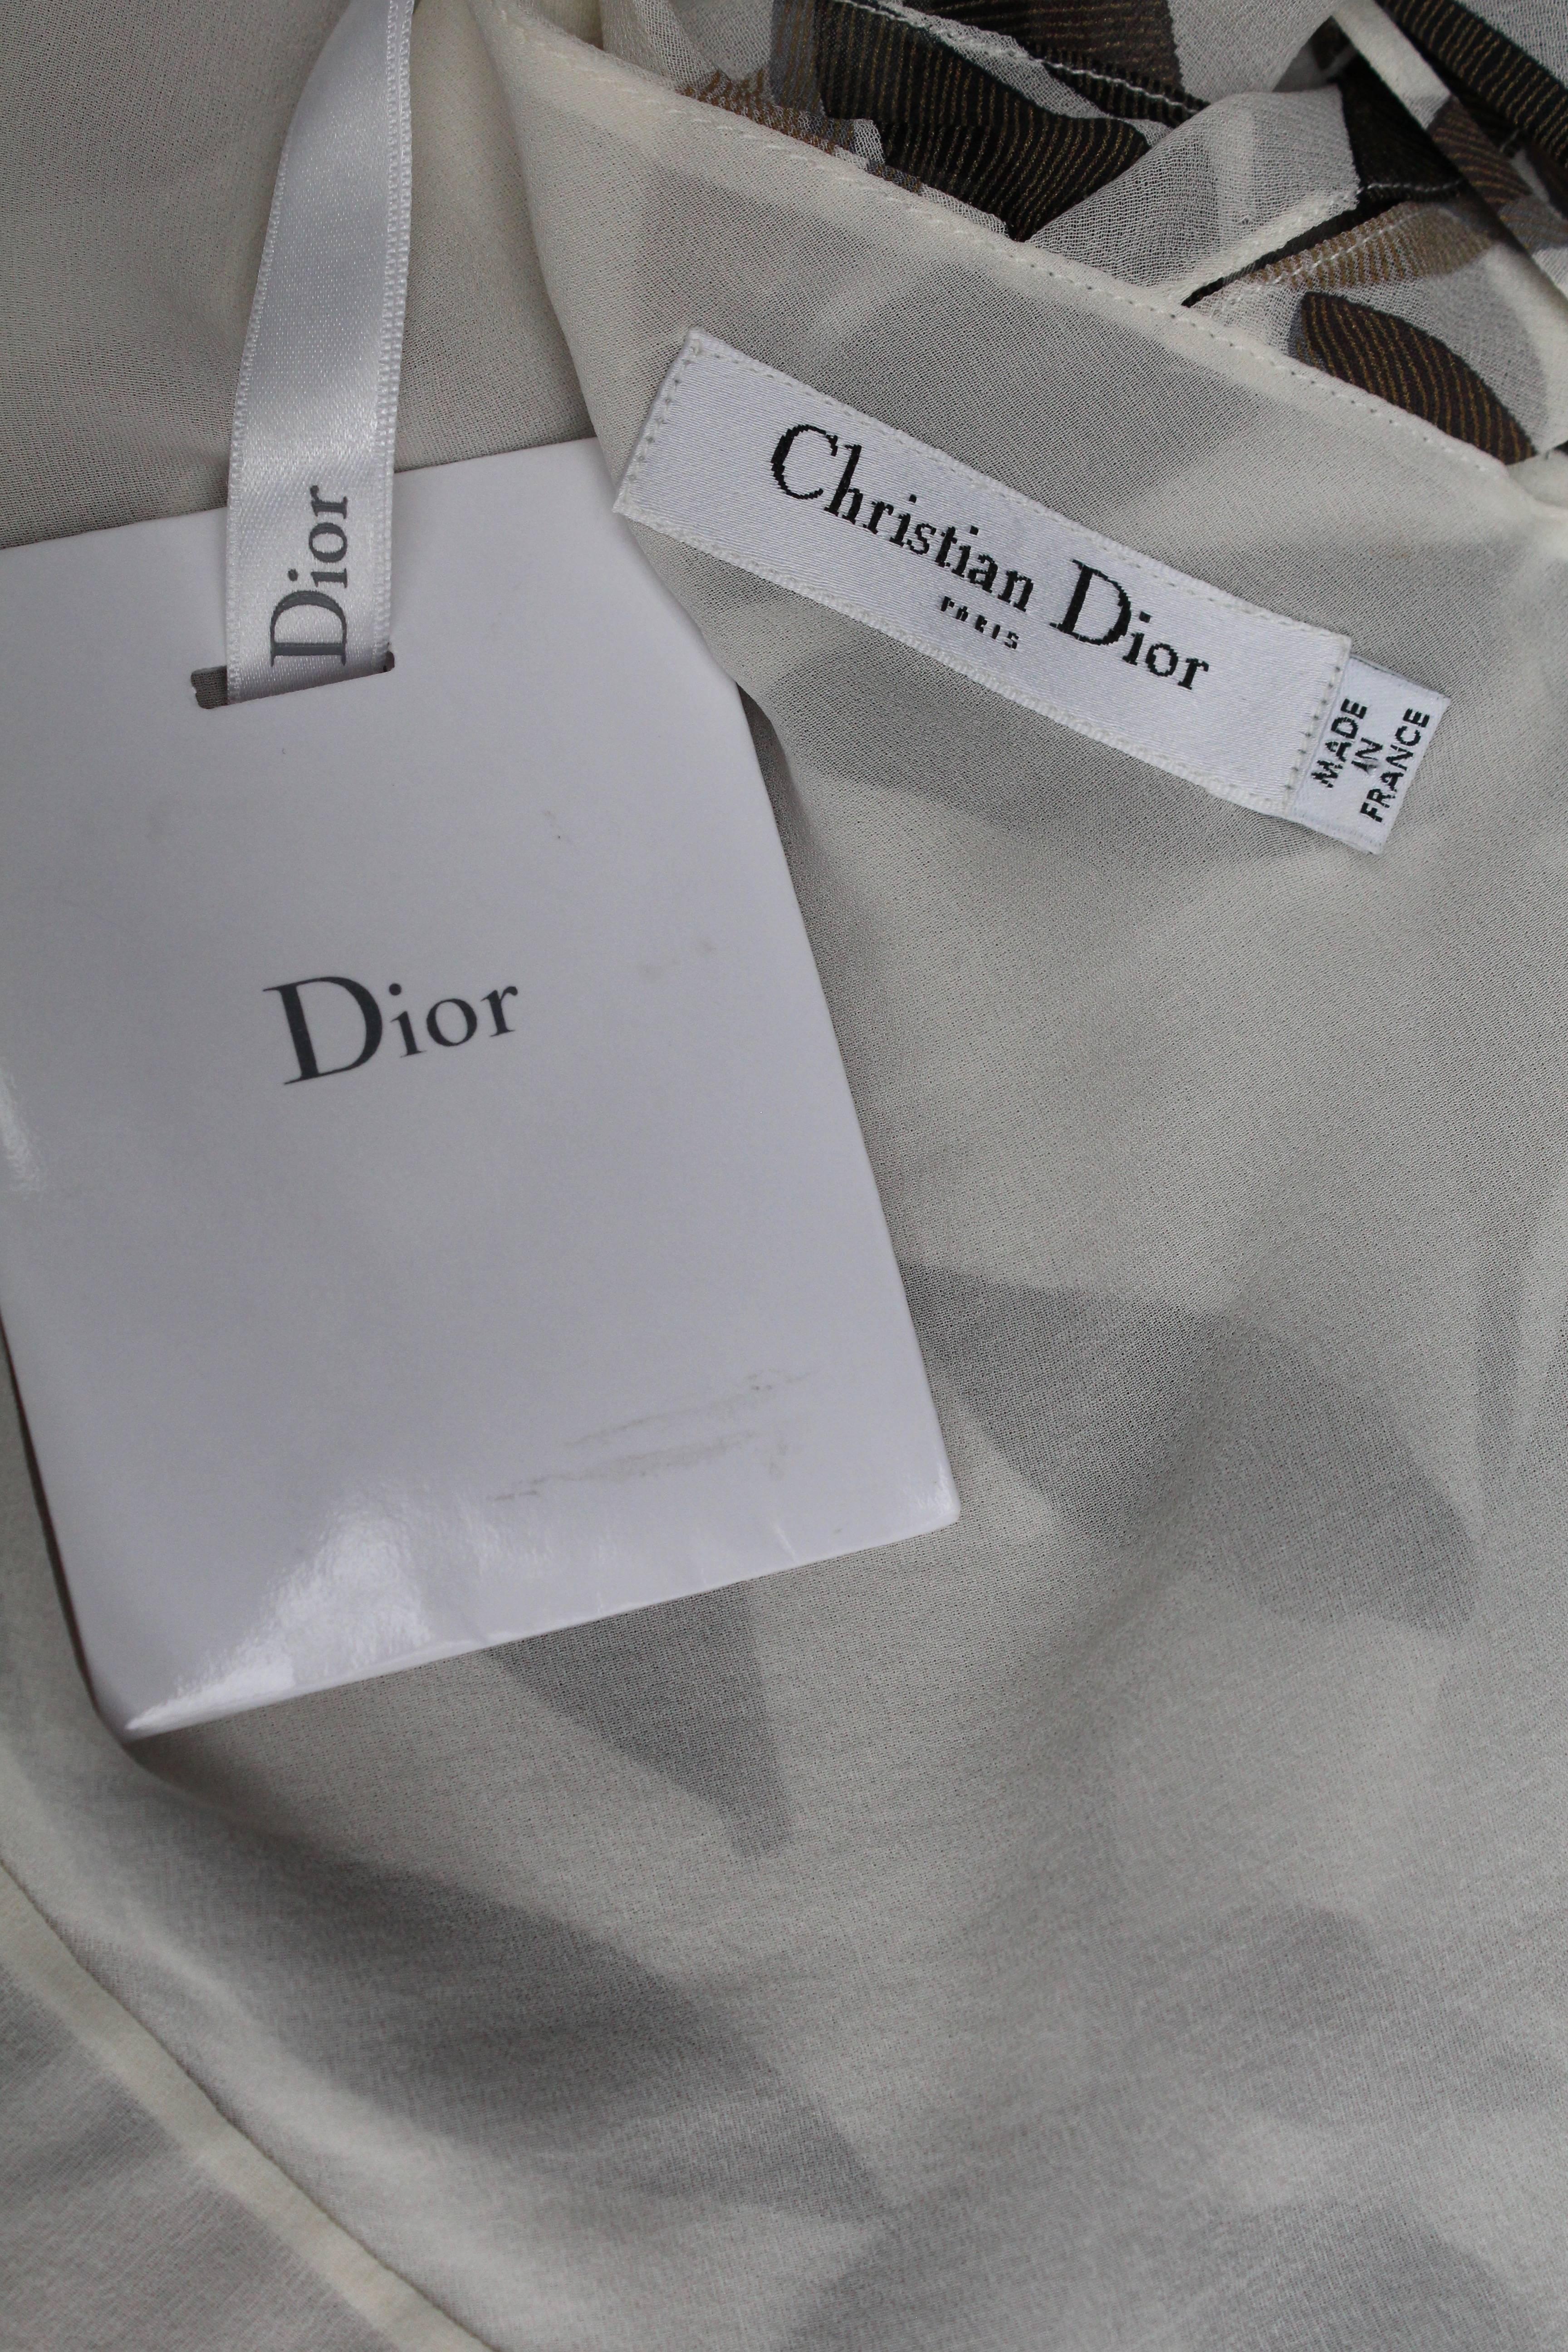 Christian Dior asymmetrical evening top in off-white chiffon and flowers For Sale 4